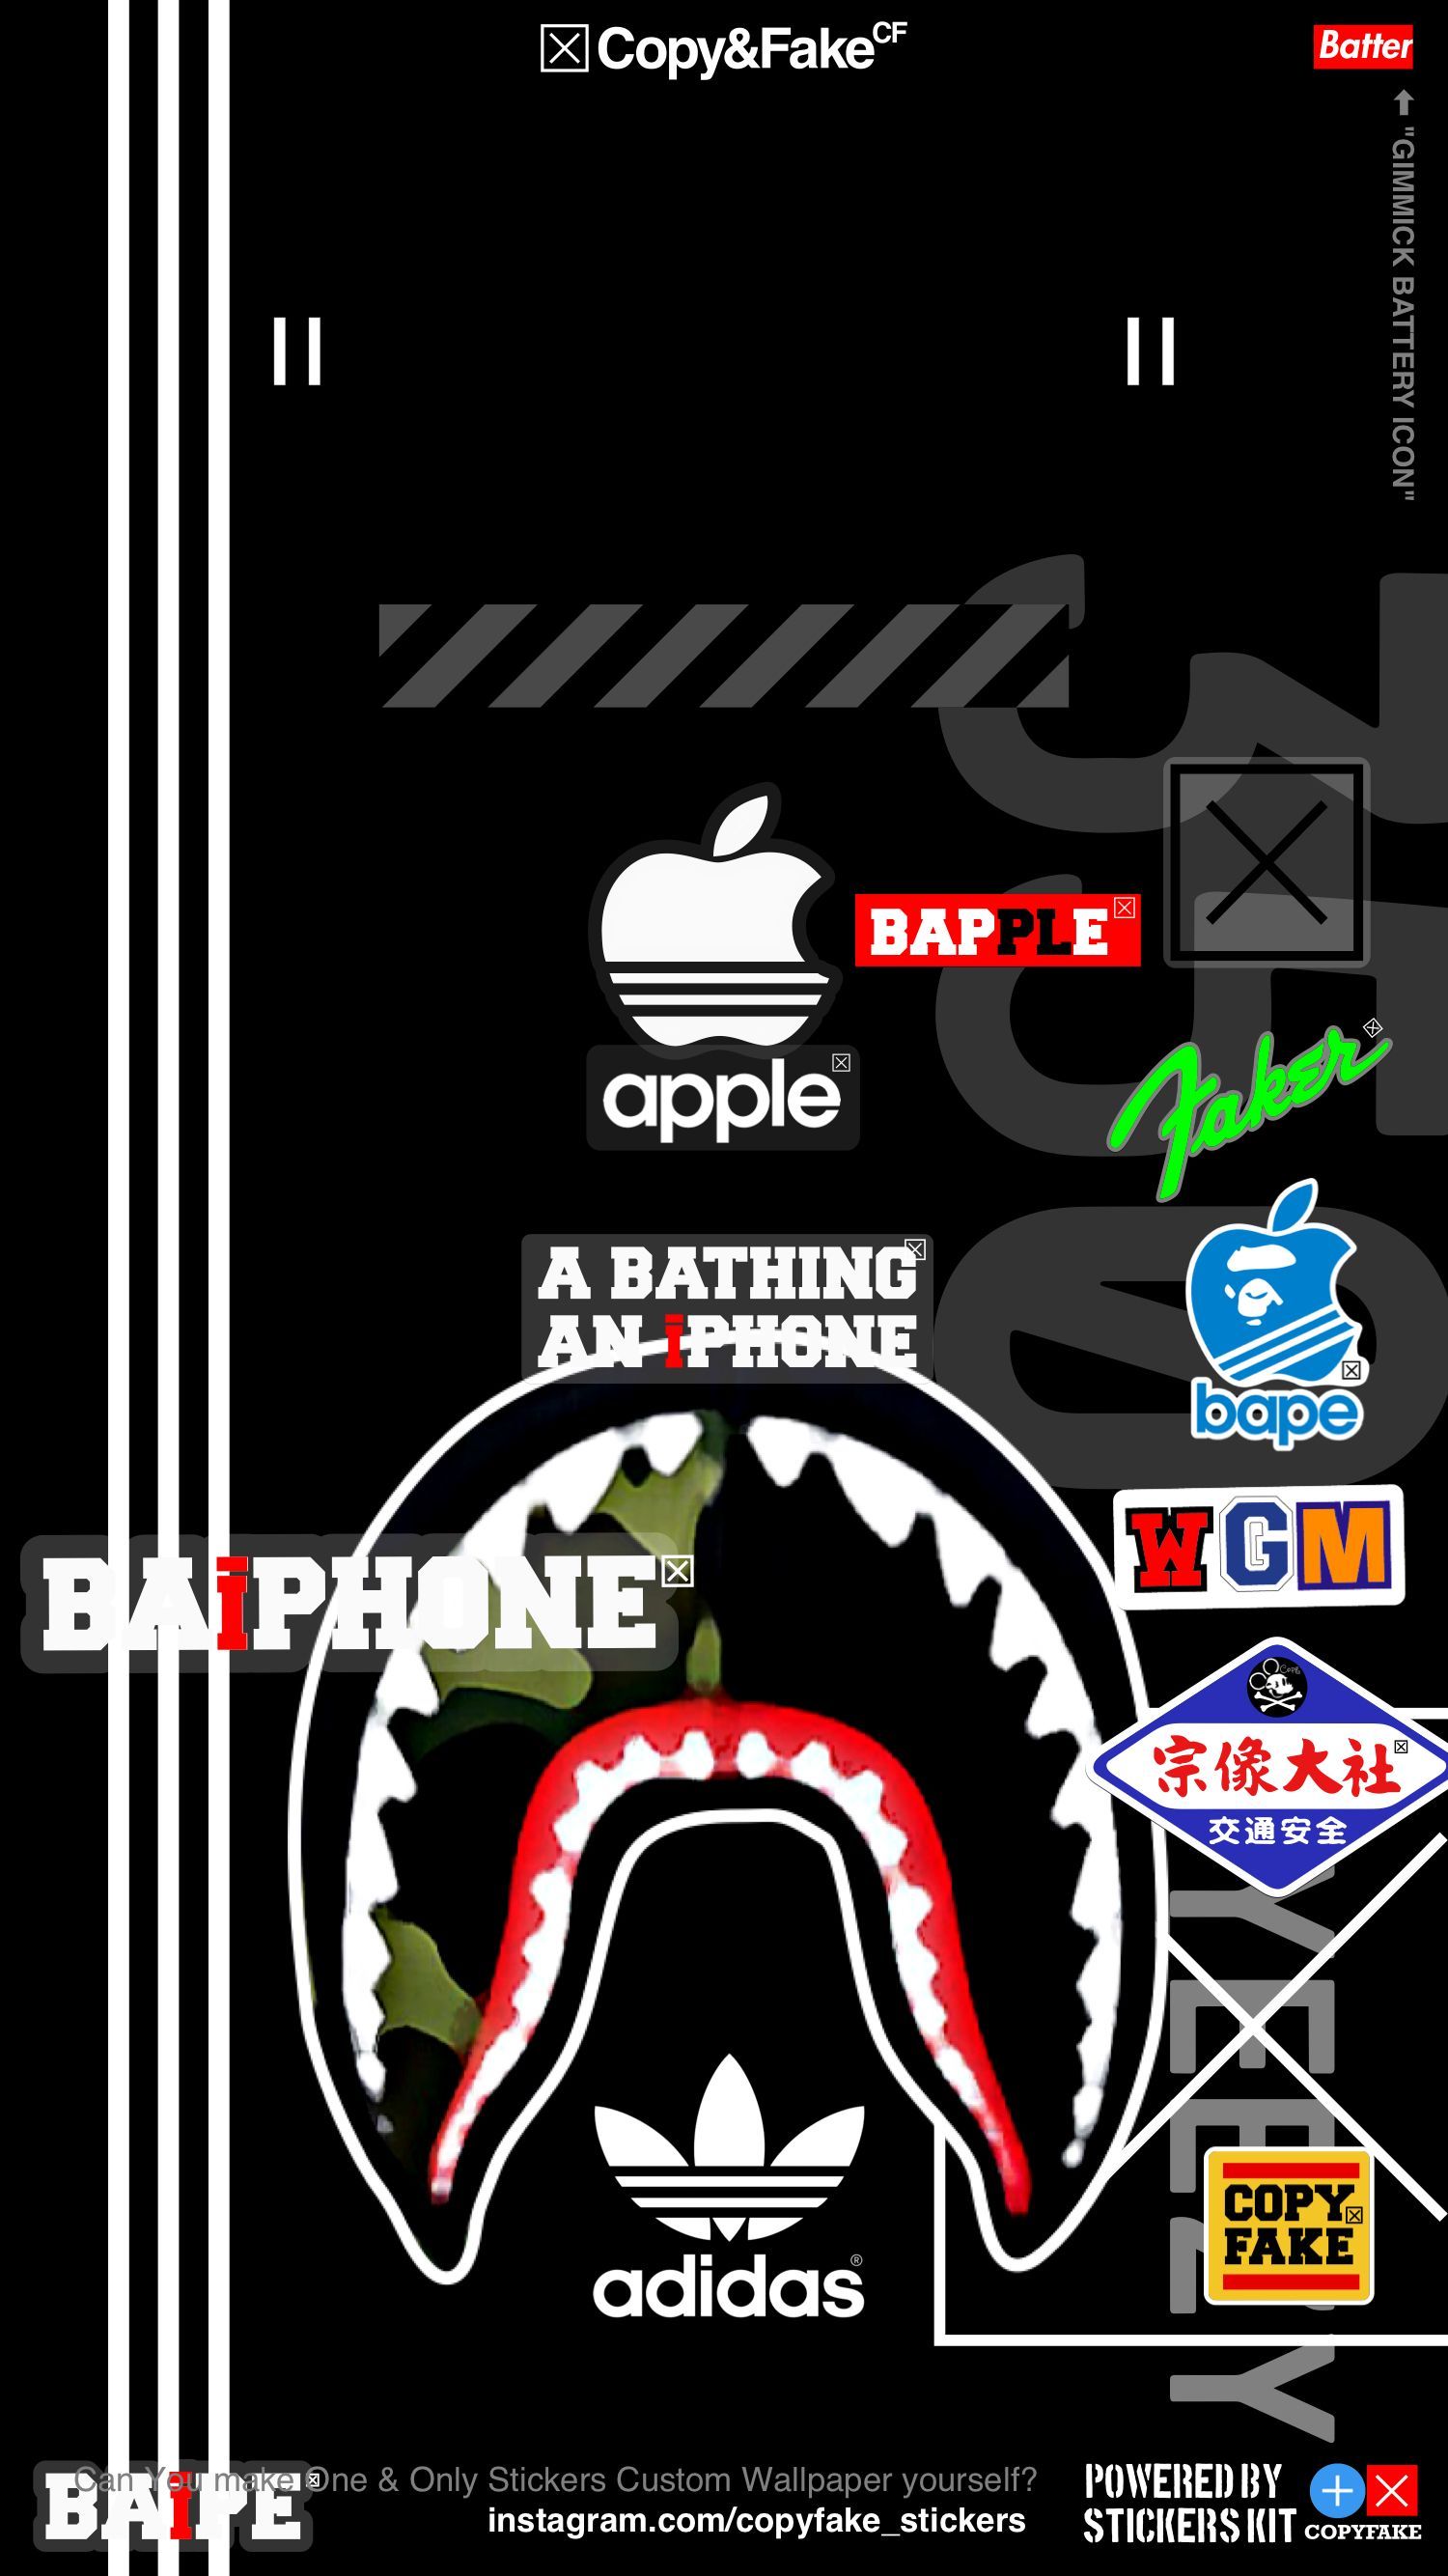 BAPE Adidas STICKERS Wallpaper Blk Made By STICKERS KIT. Bape Wallpaper Iphone, Hypebeast Iphone Wallpaper, Bape Wallpaper